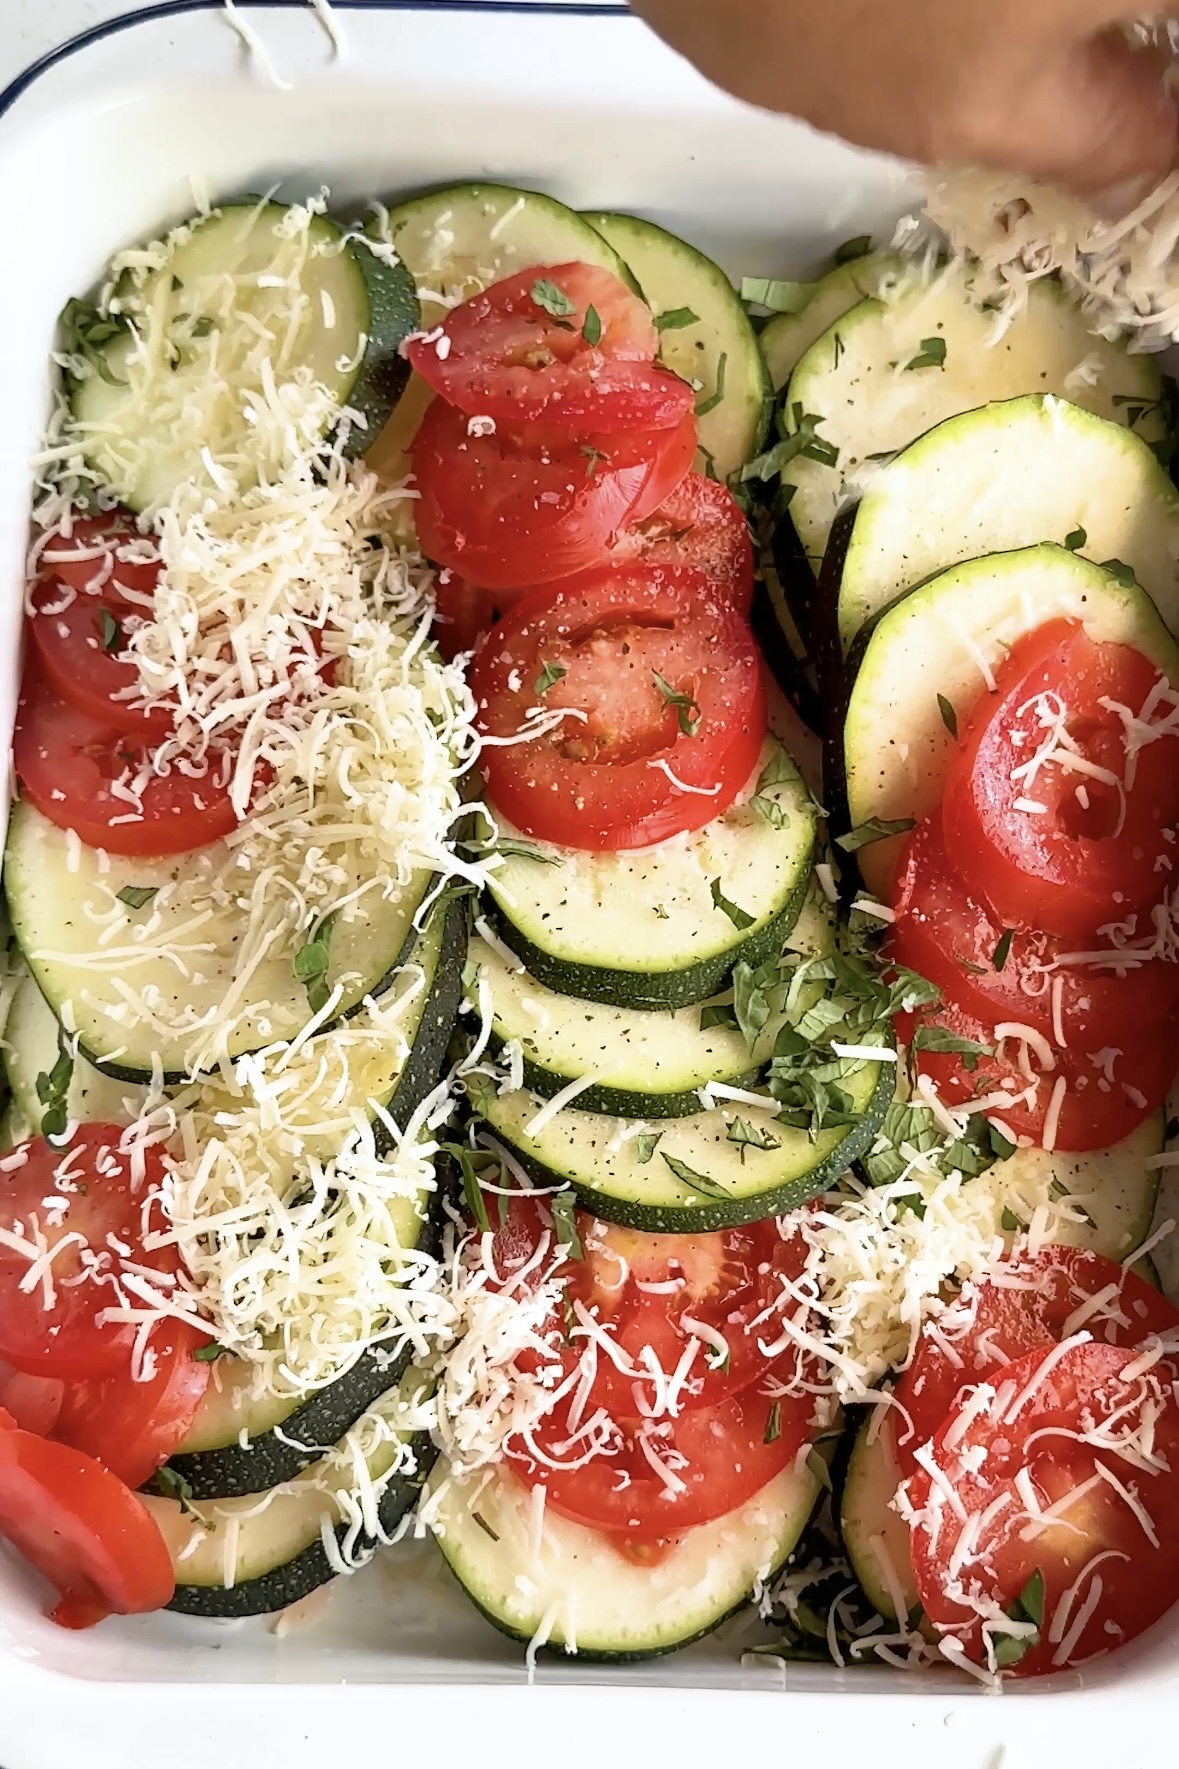 Tomato and zucchini layered in a casserole dish topped with cheese.